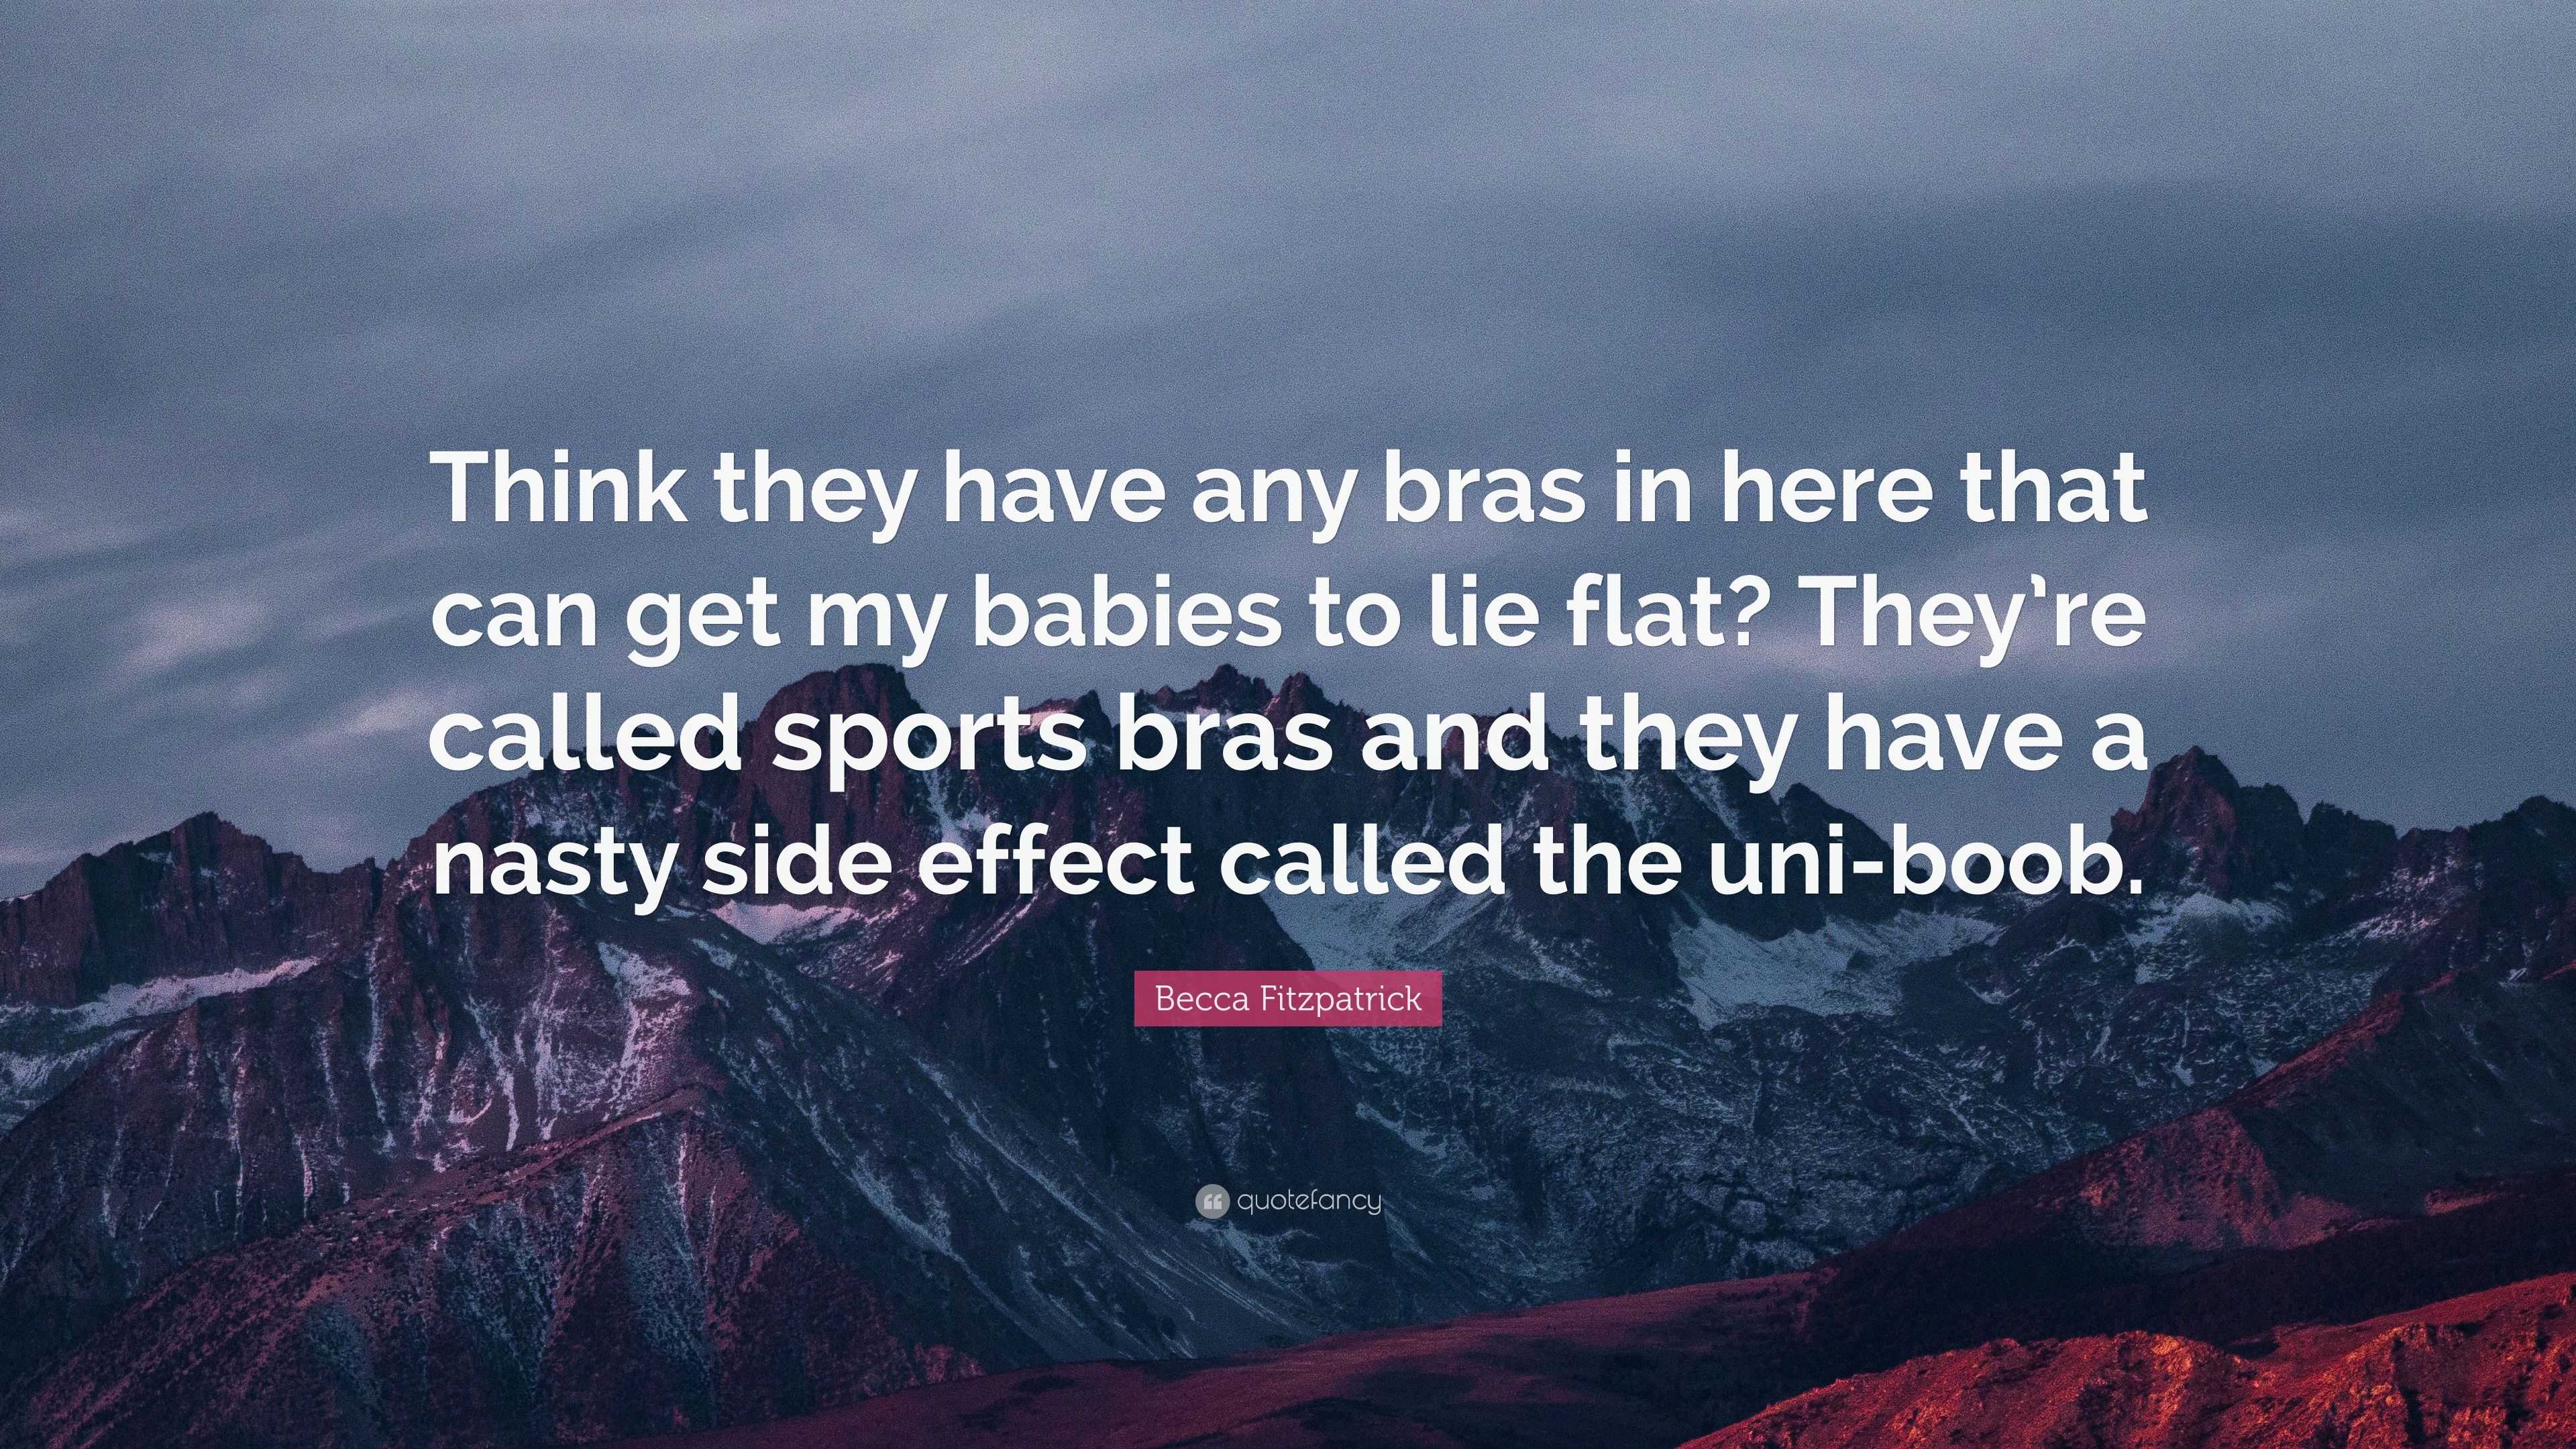 Becca Fitzpatrick Quote: “Think they have any bras in here that can get my  babies to lie flat? They're called sports bras and they have a nasty si”